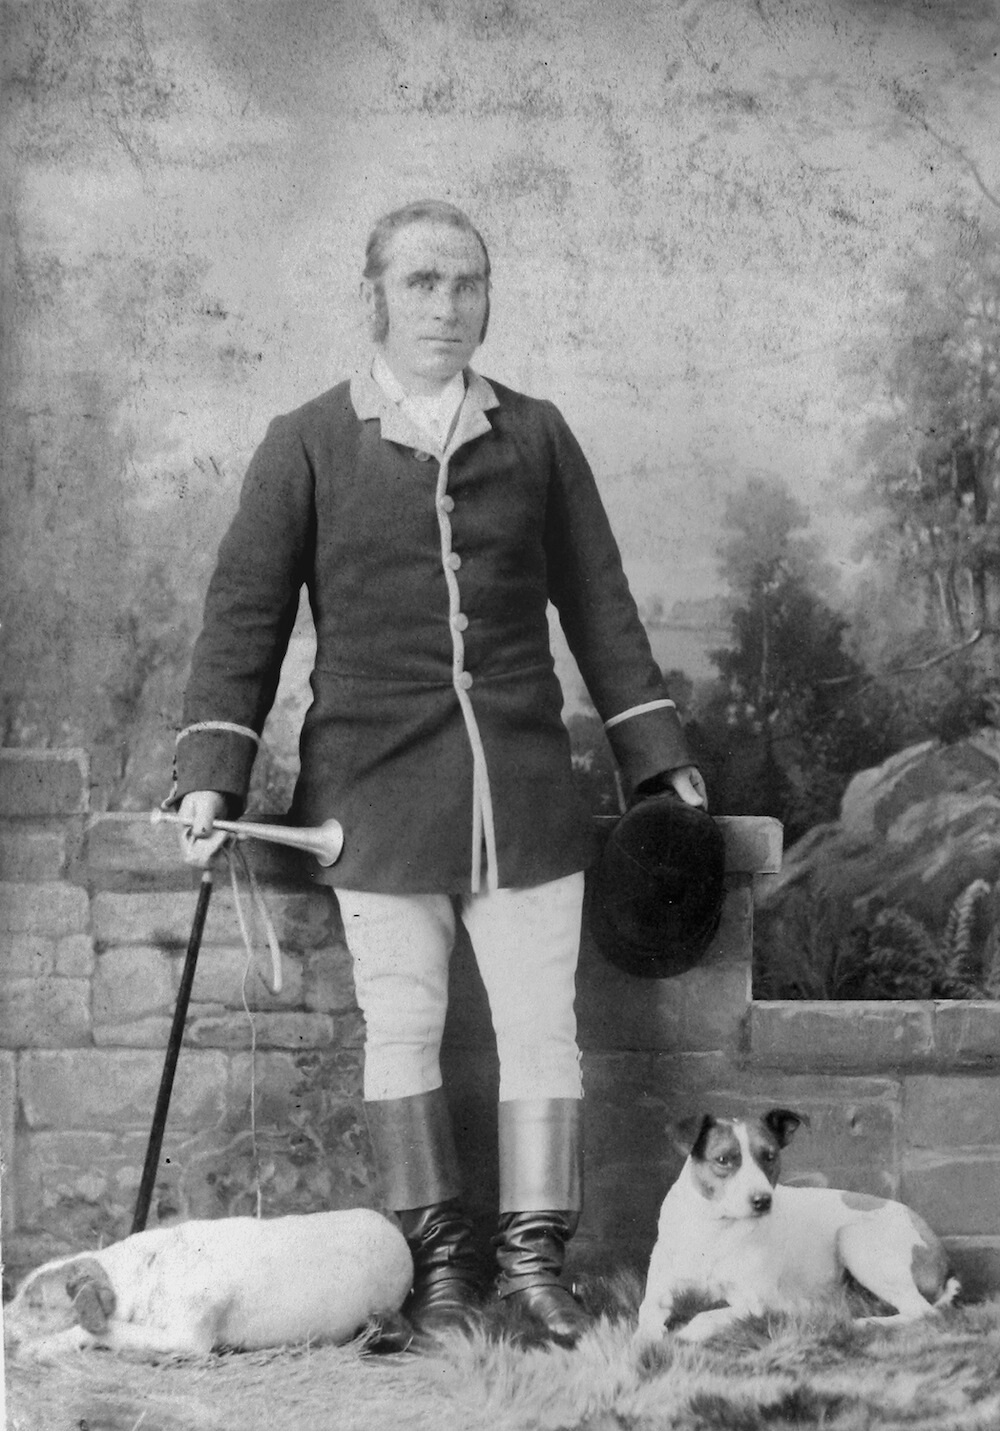 1882 - William D. Drysdale and dogs, Montreal